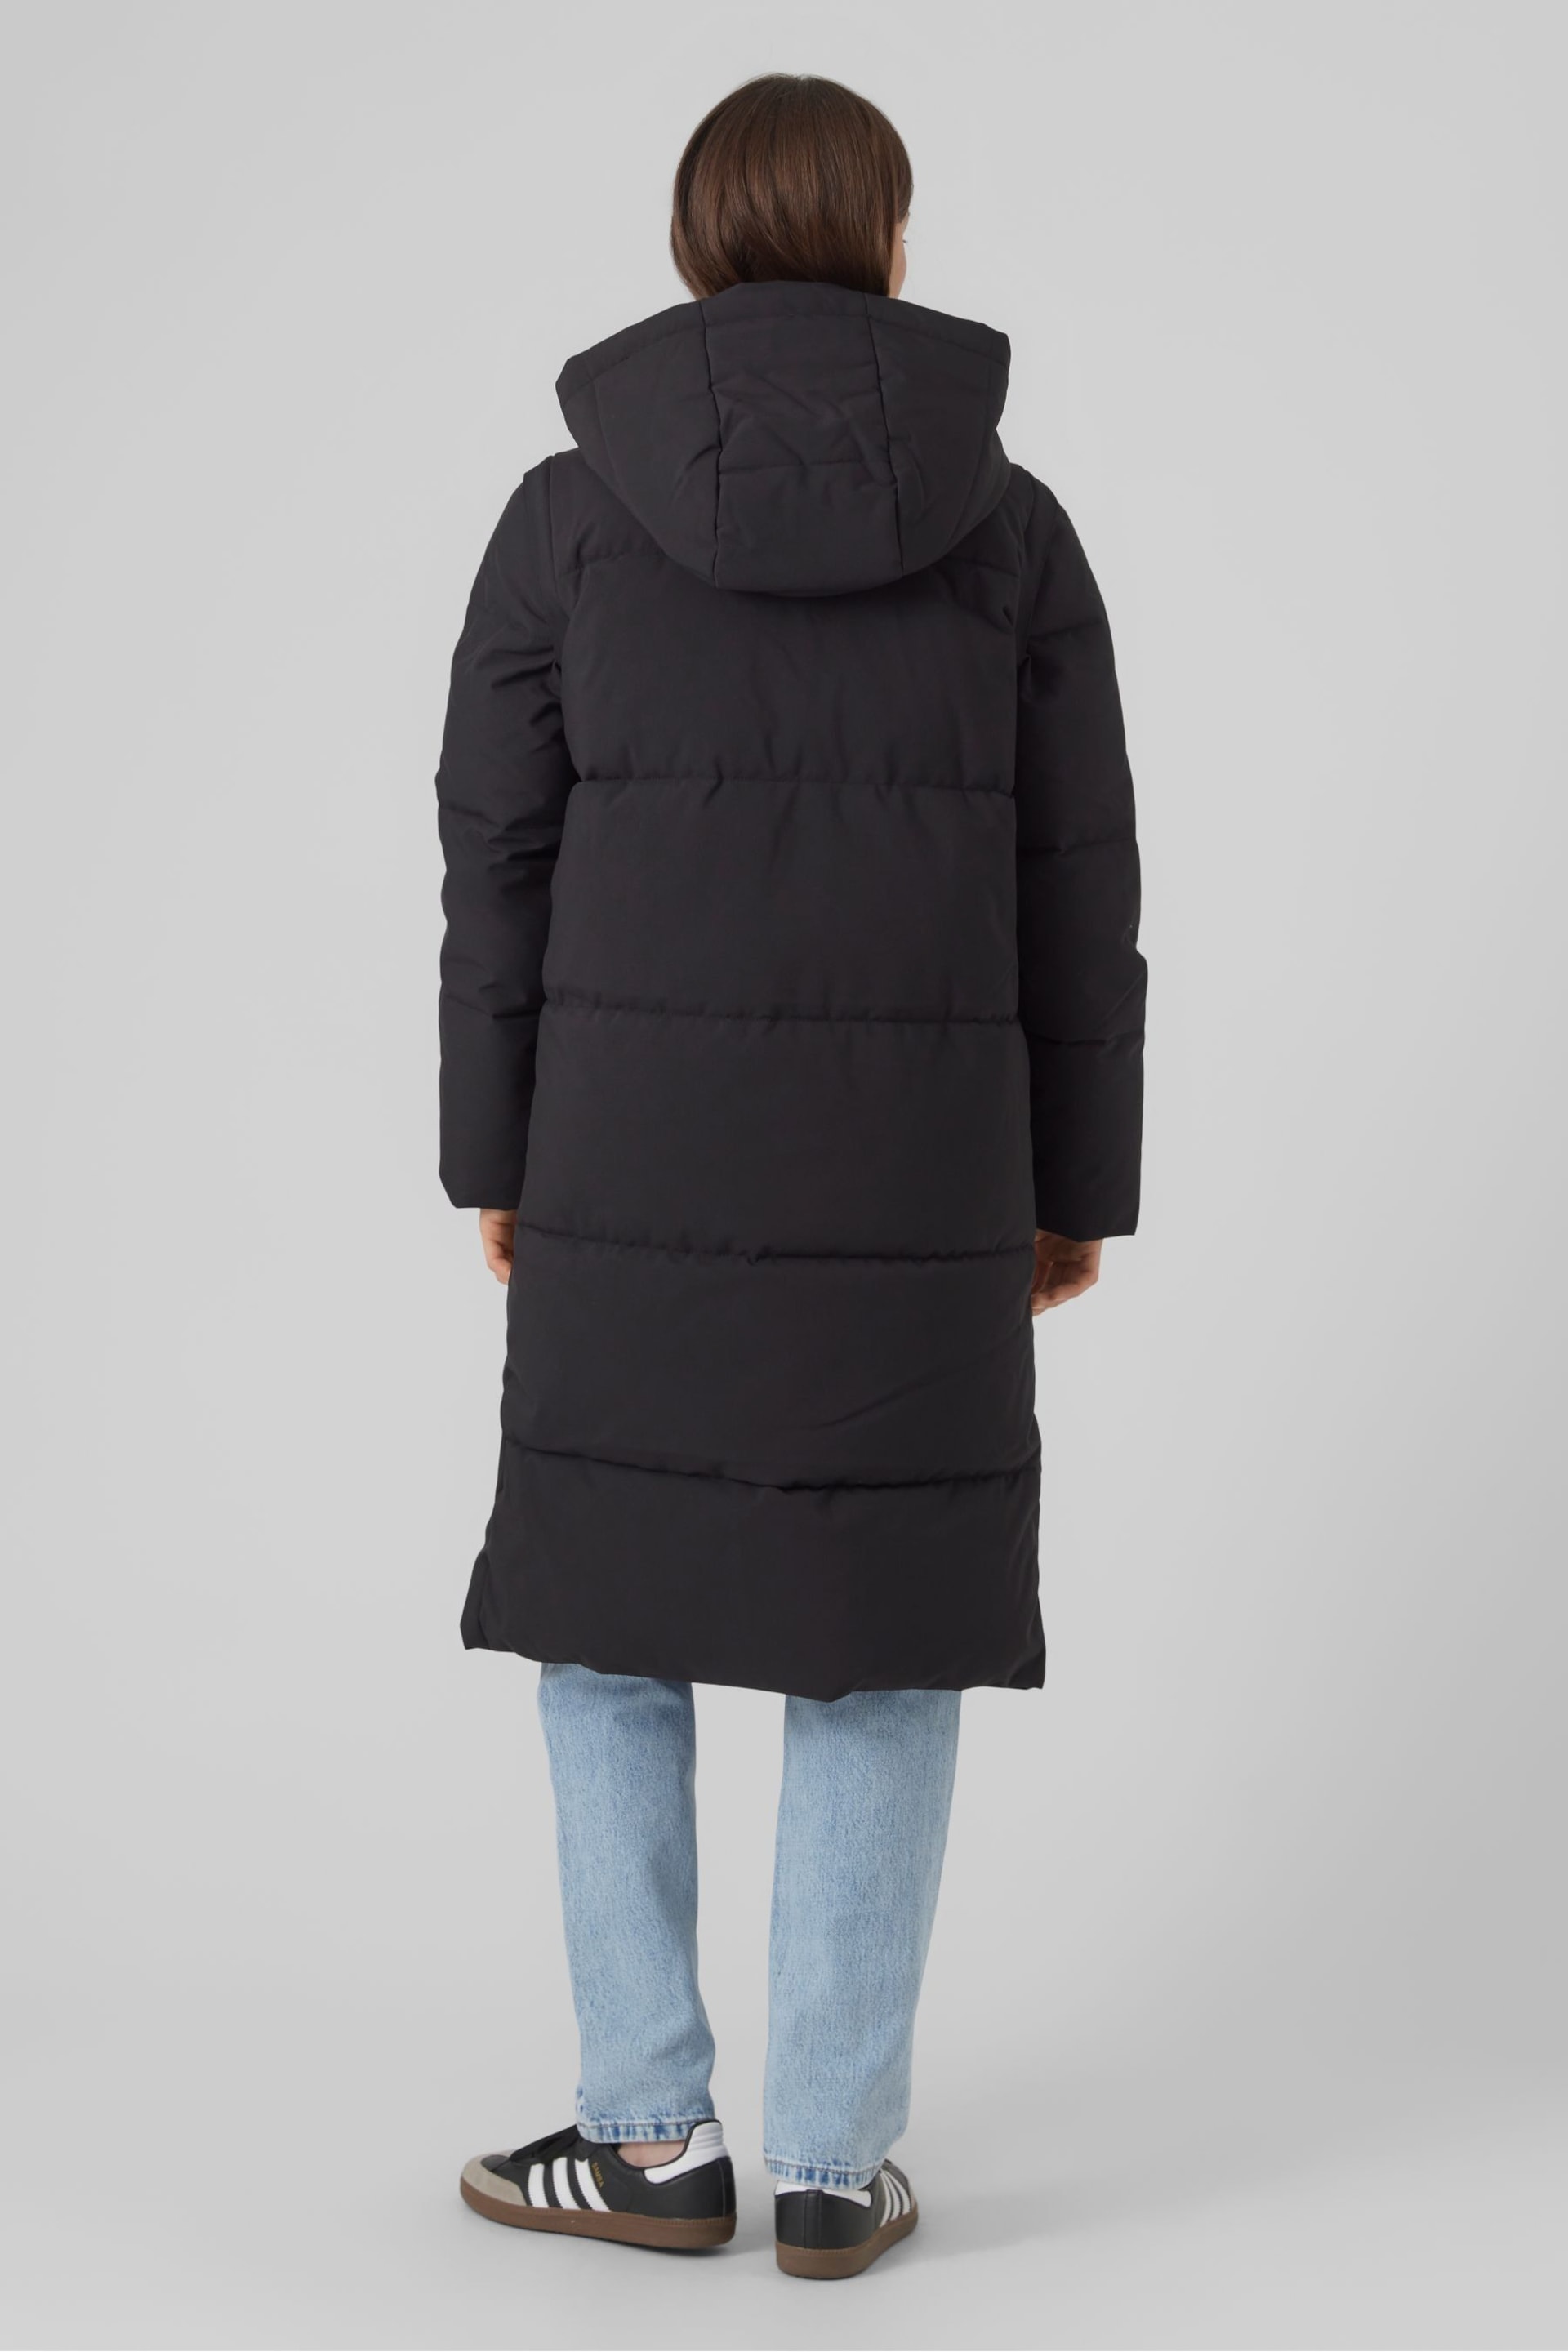 VERO MODA Black 2-In-1 Padded Coat And Gilet Set With Detachable Sleeves - Image 2 of 5